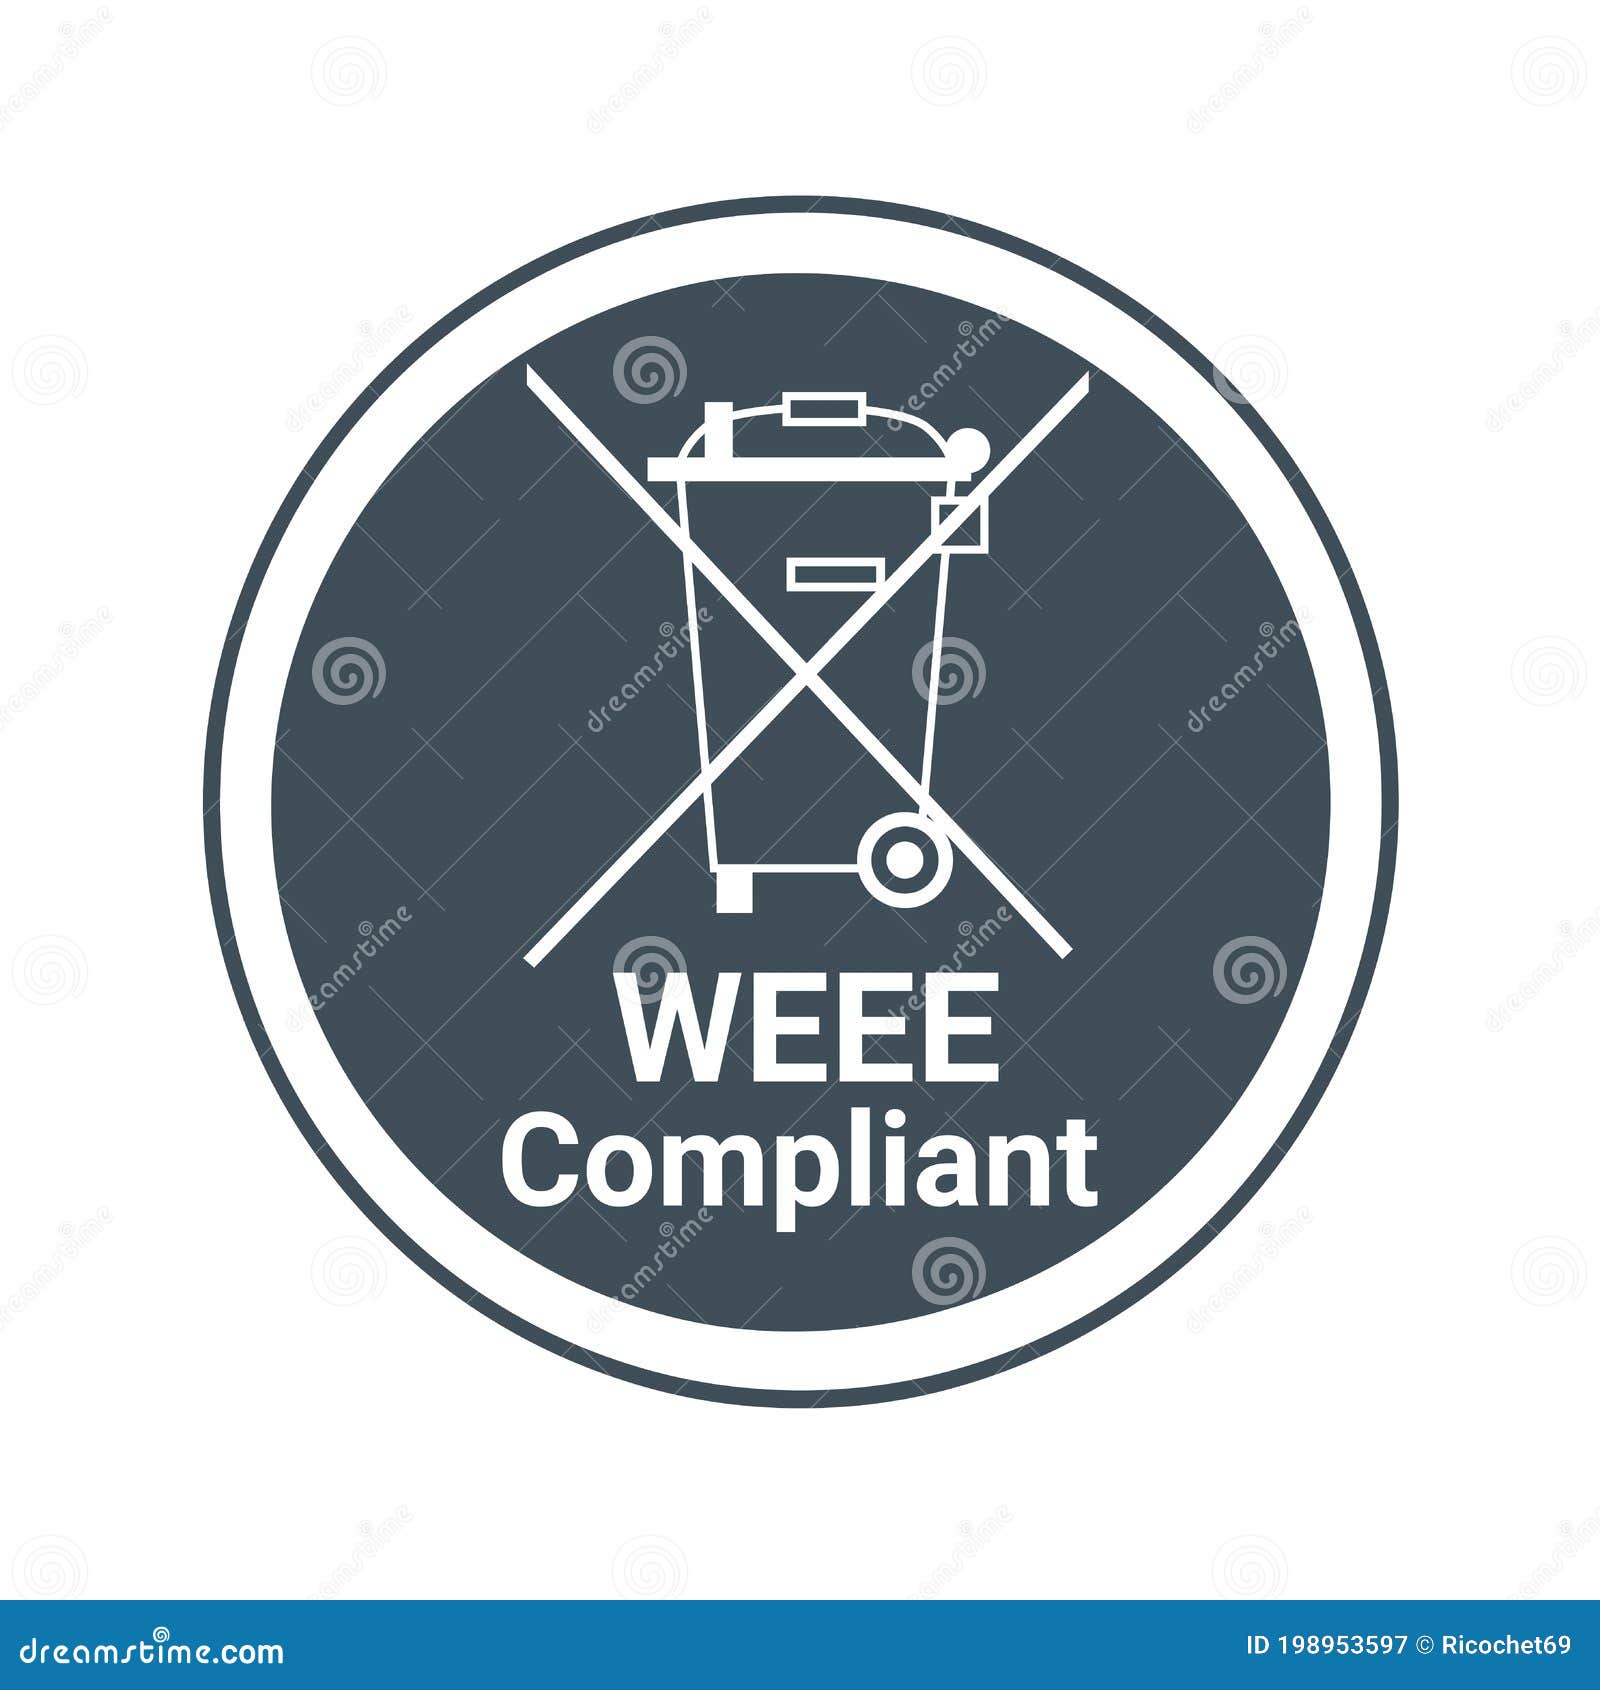 weee, waste electrical and electronic equipment directive compliant 